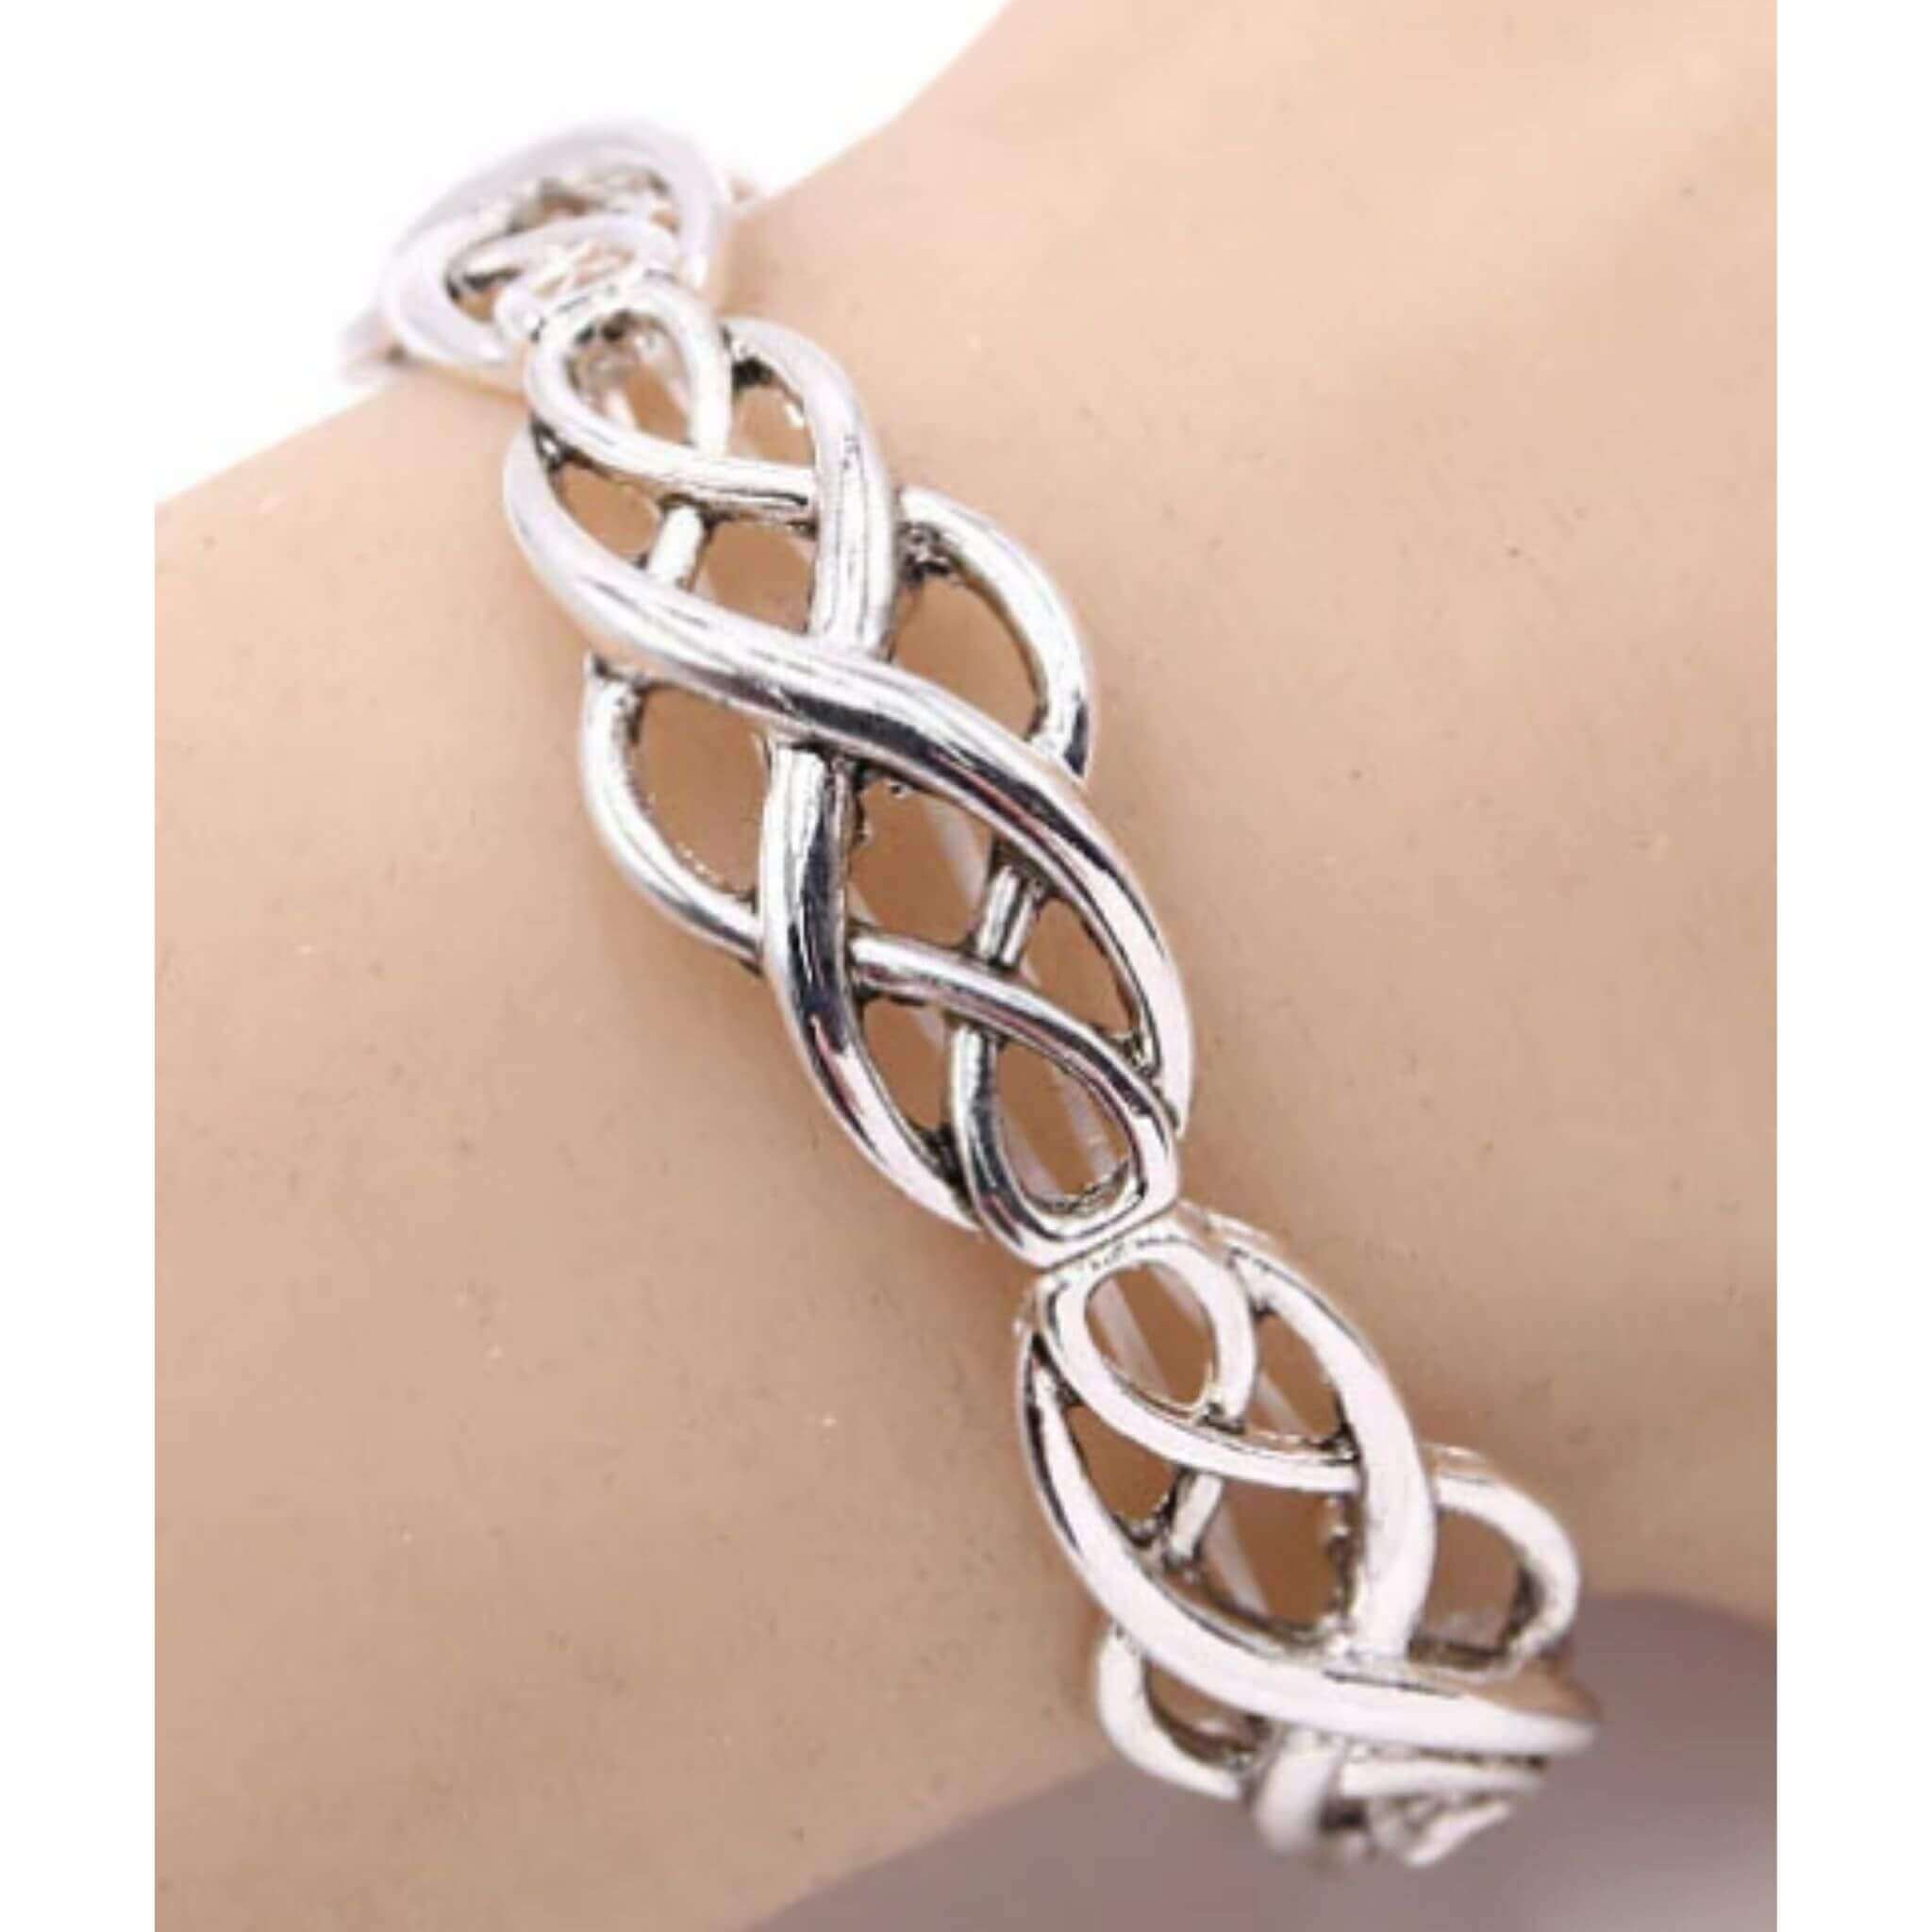 Amazon.com: Handmade 925 Sterling Silver Beads Bangle Bracelet Fashion  Jewelry Simple Adjustable 925 Silver Cuff Bangles for Women (Color 15) :  Handmade Products